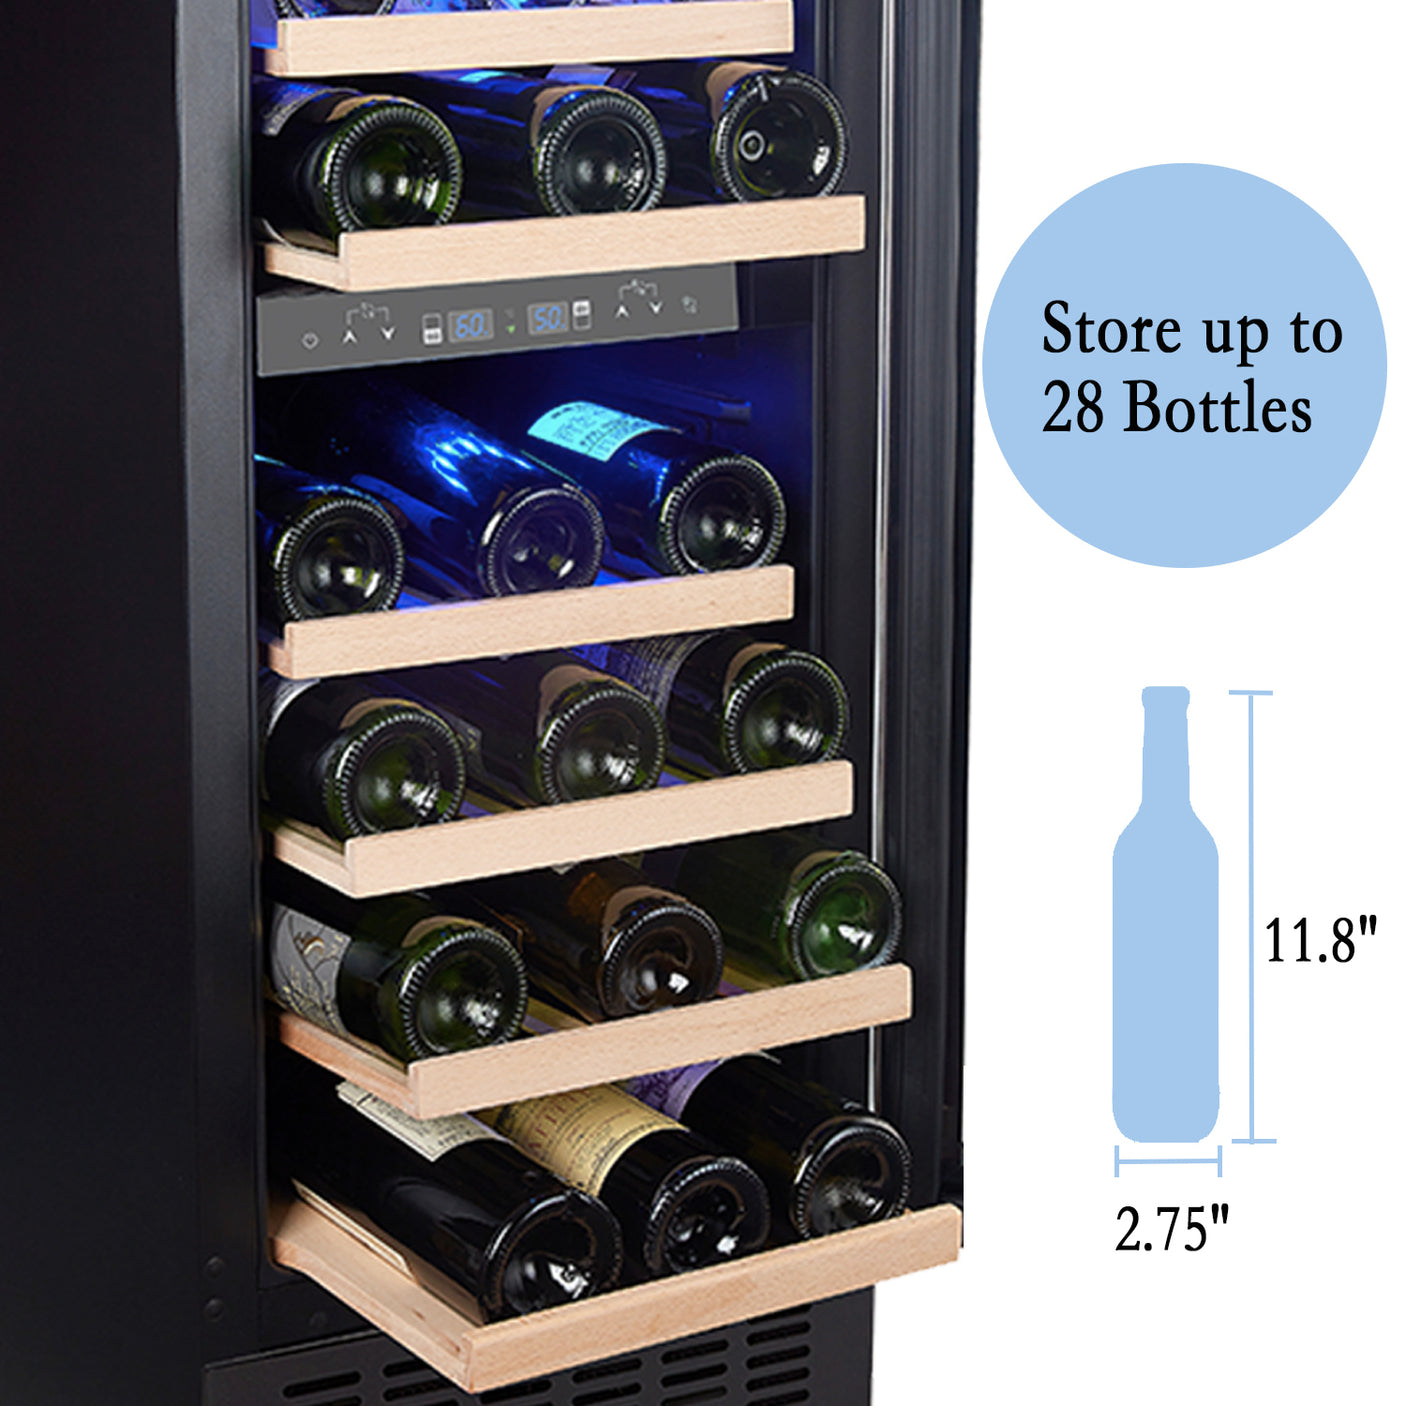 SOTOLA 15 Dual Zone Inch Wine Cooler Refrigerators 28 Bottle Fast Cooling Low Noise Wine Fridge with Professional Compressor Stainless Steel, Digital Temperature Control Screen Built-in or Freestandin